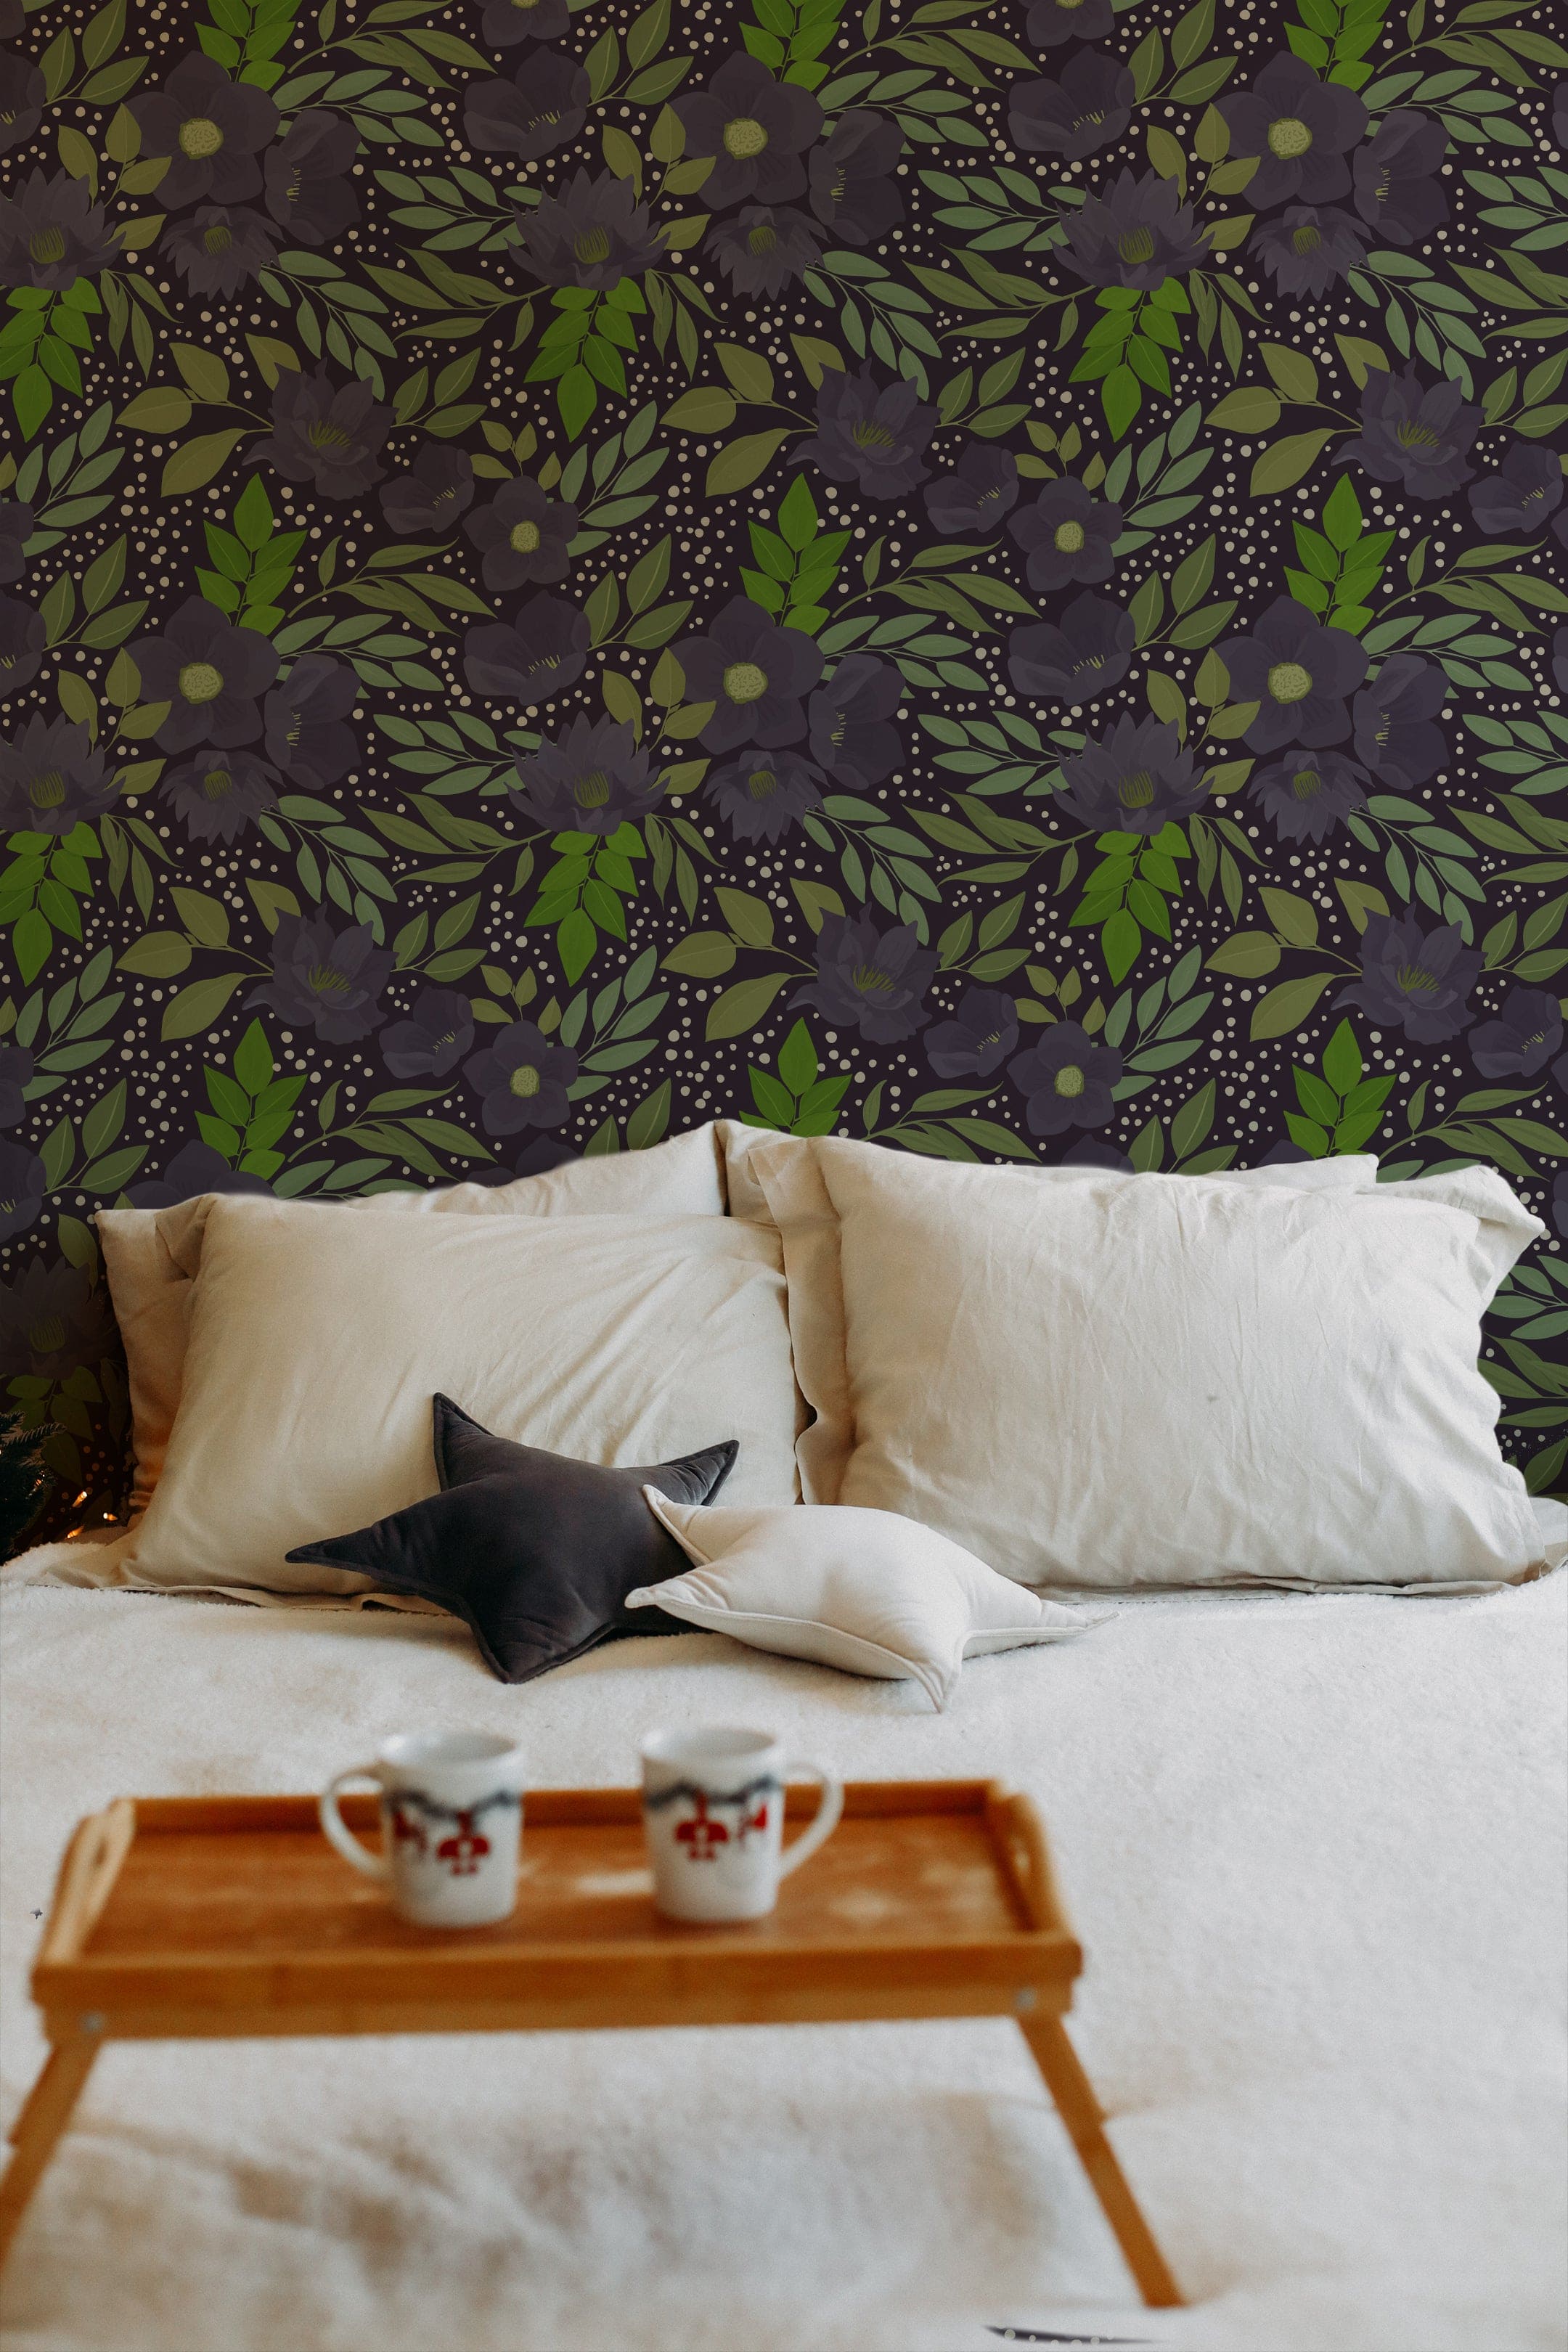 A tranquil bedroom setting where the Martinique Floral Wallpaper adds a dramatic touch with its oversized purple flowers and dense greenery on a deep background. A black cat lounges on a bed with white linens, blending seamlessly into the floral theme.